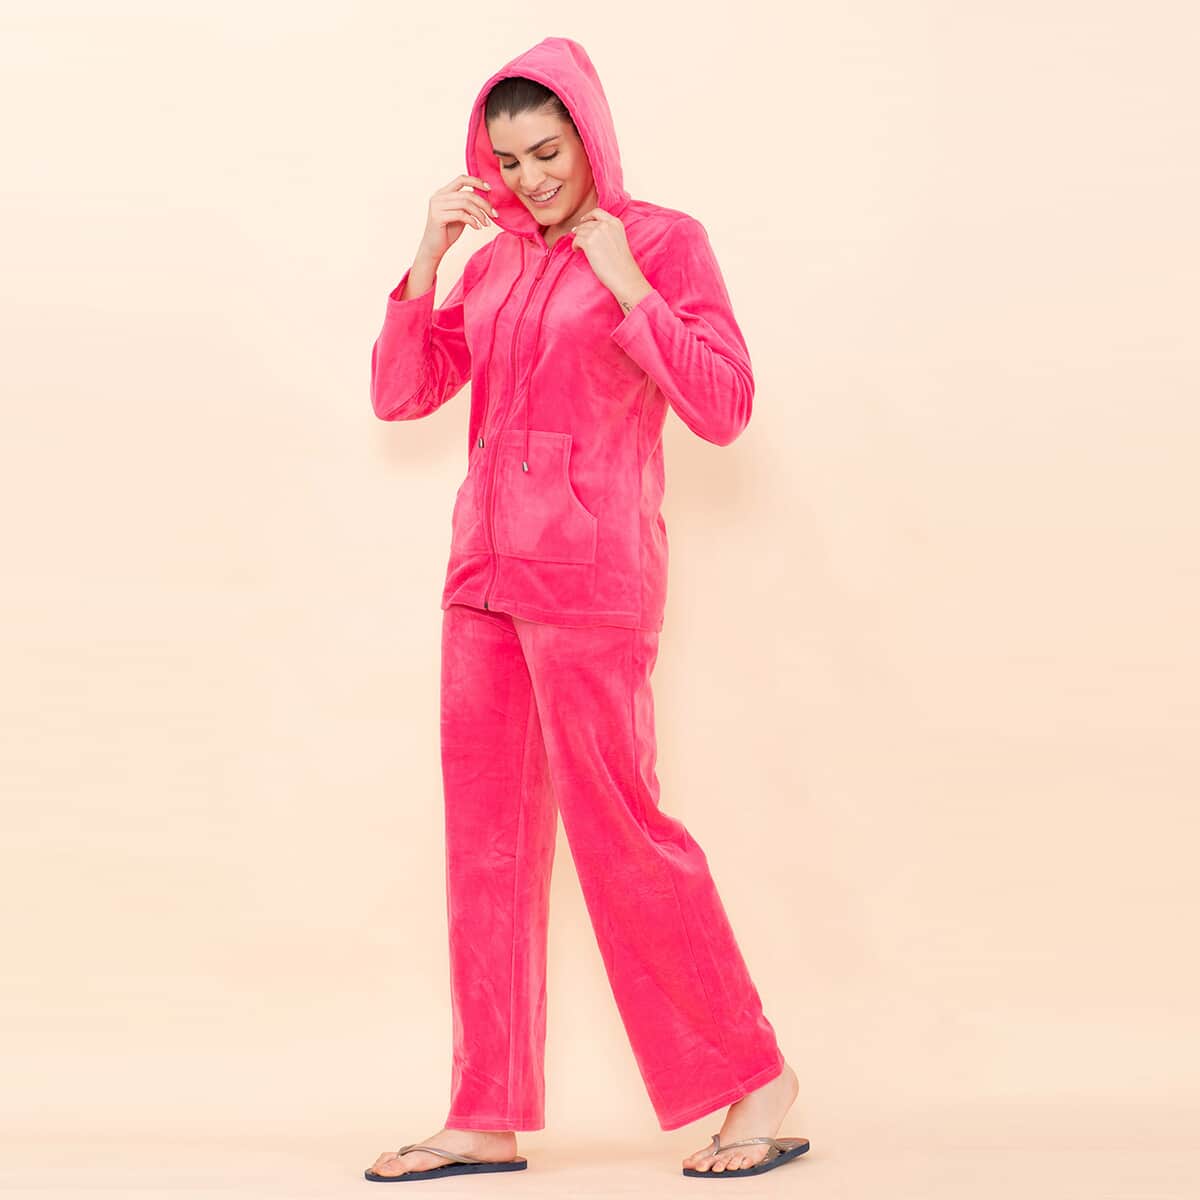 Tamsy LUX Pink Velour Track Suit Set - XL image number 4